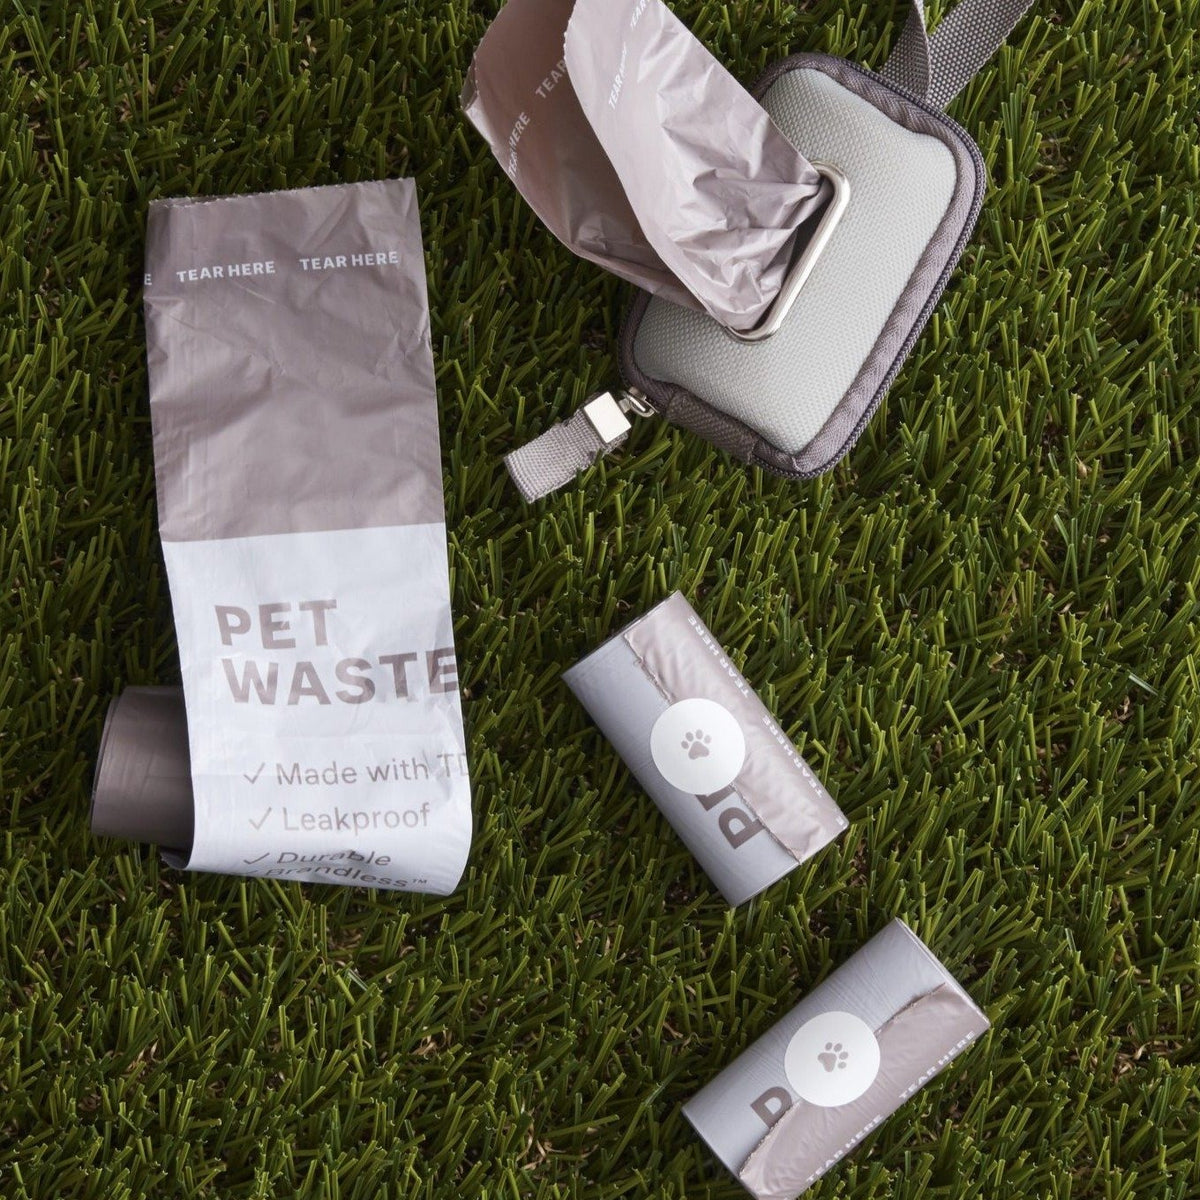 Lifestyle photo, showing the brandless pet waste bag rolls and waste bag dispeser on grass.